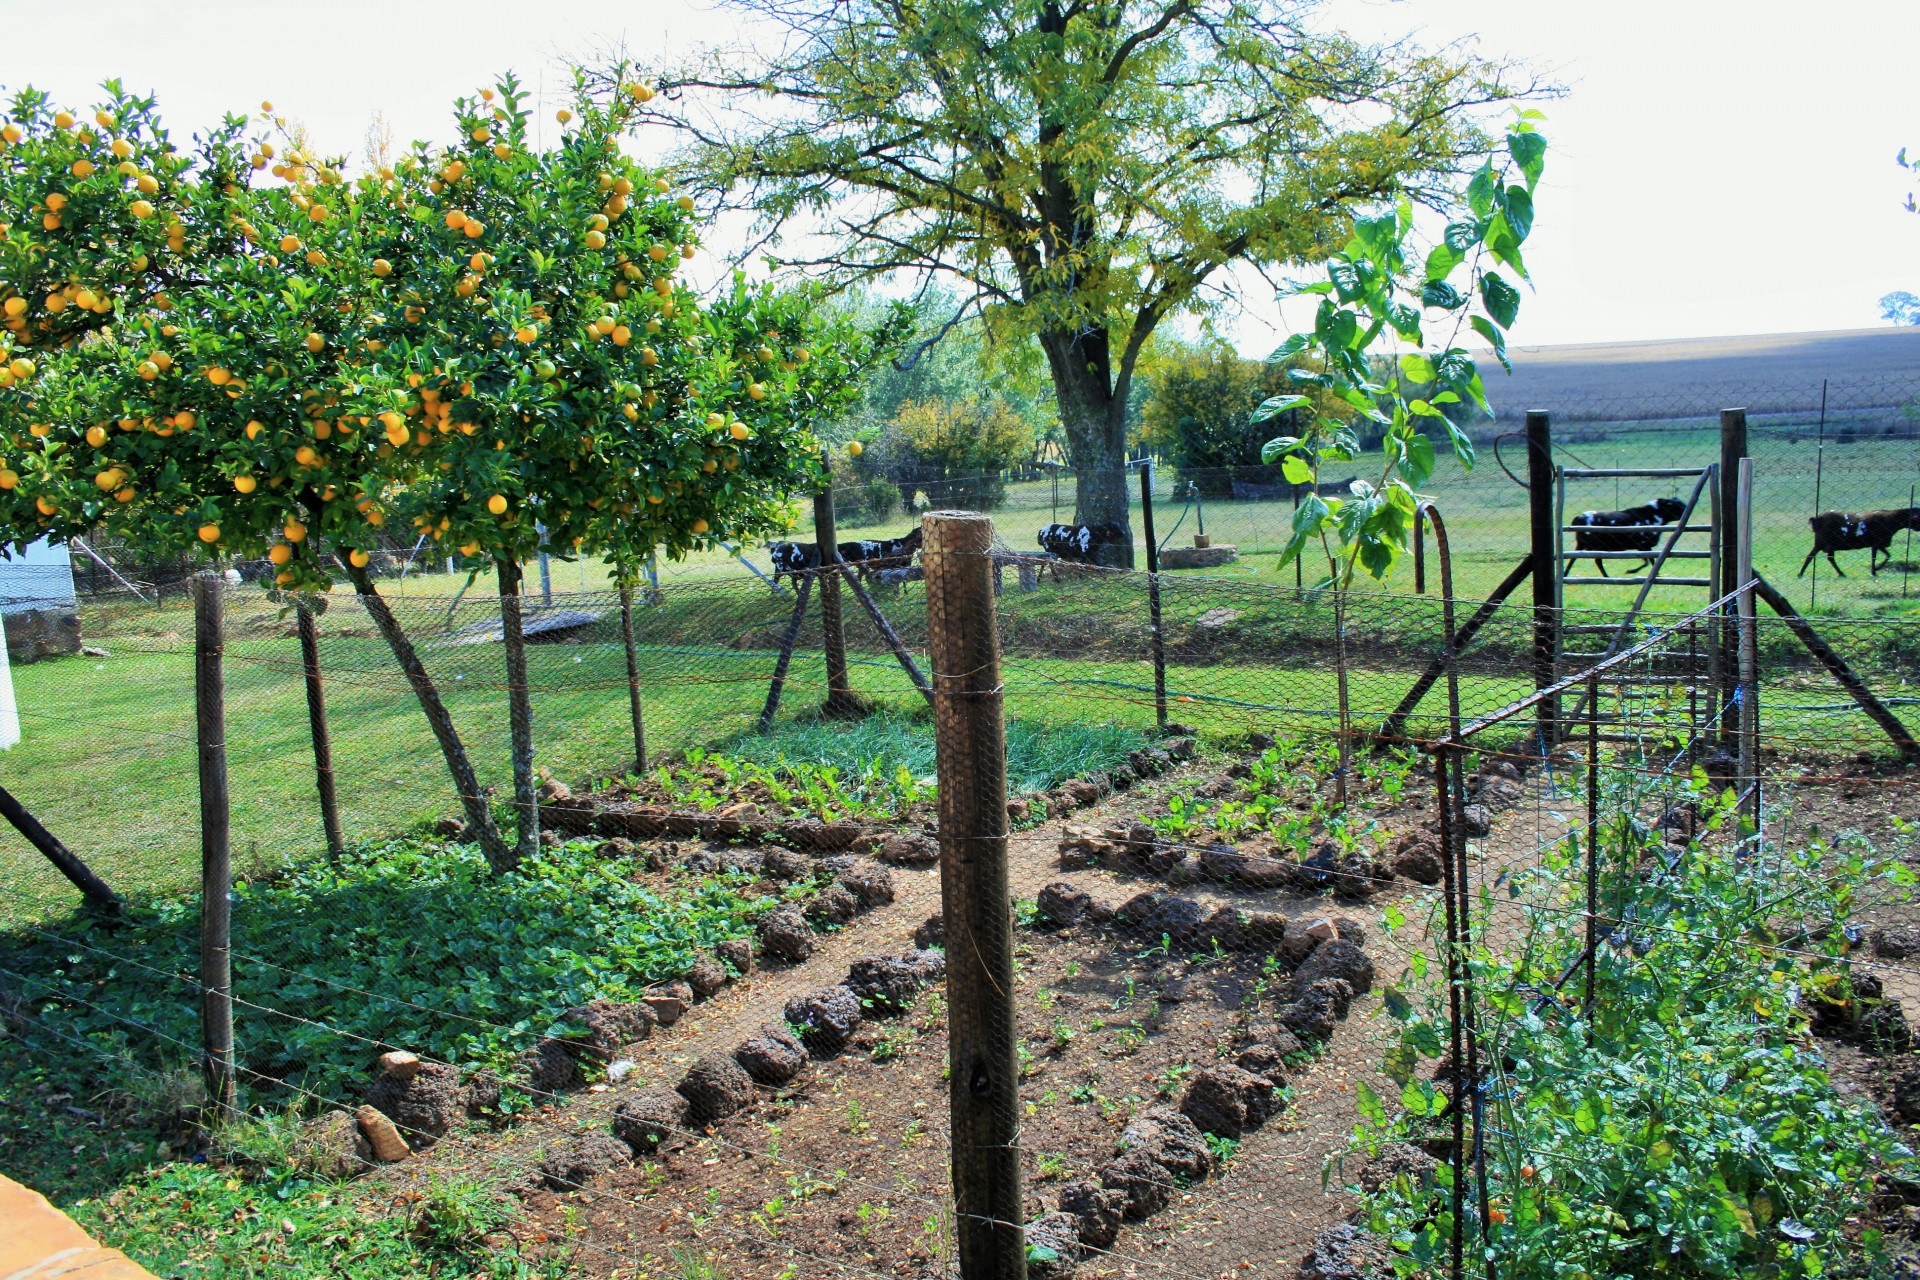 Enclosed vegetable garden with wire fencing